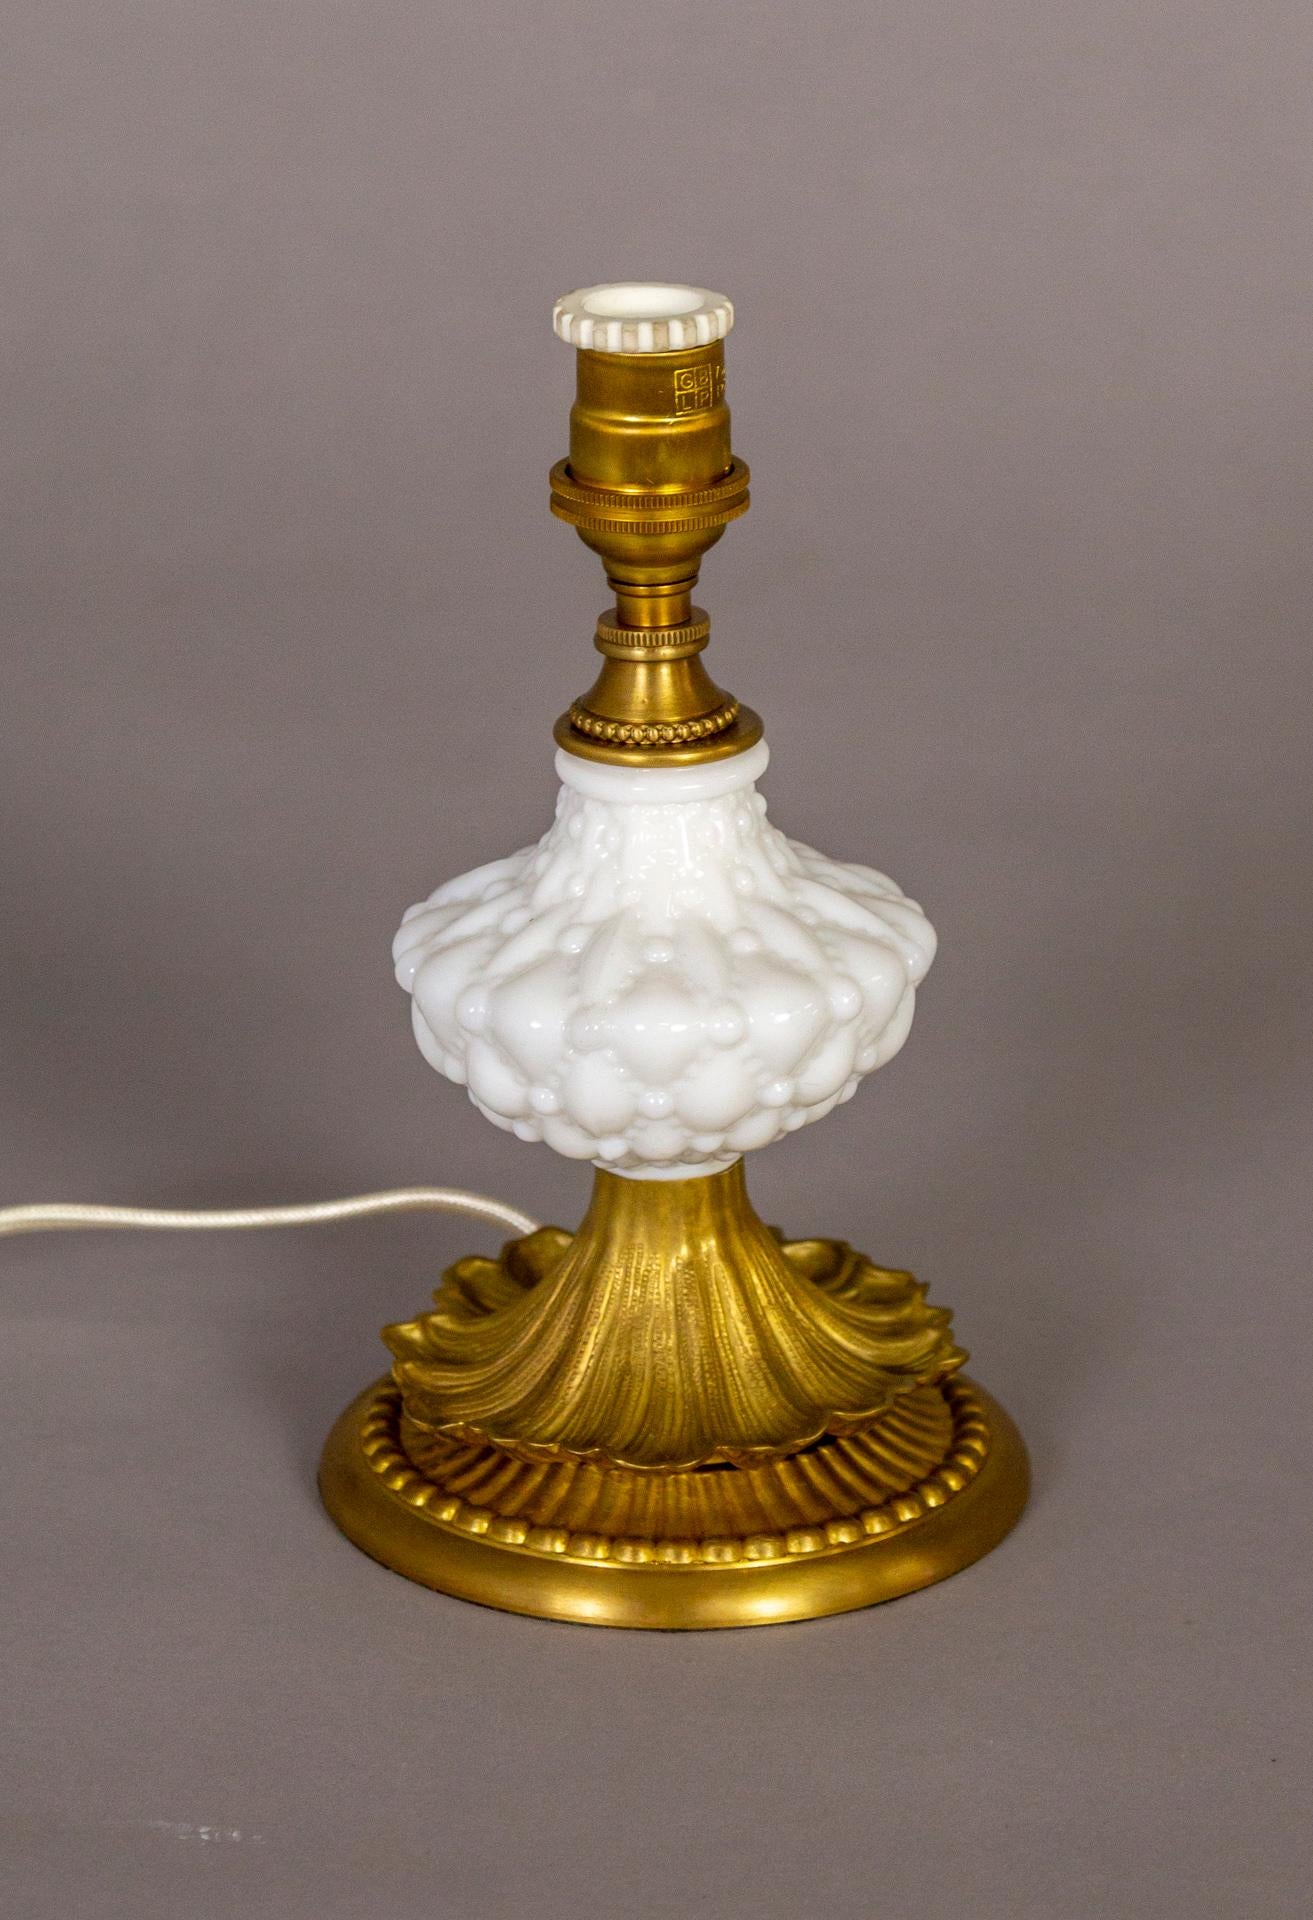 A petite, vintage, desk or dressing table lamp in white hobnail glass and detailed brass design. With an ivory color silk, empire bell shape, clip-on shade. Circa 1940s. In-line switch; candelabra socket. Newly wired. Measures: 12.5